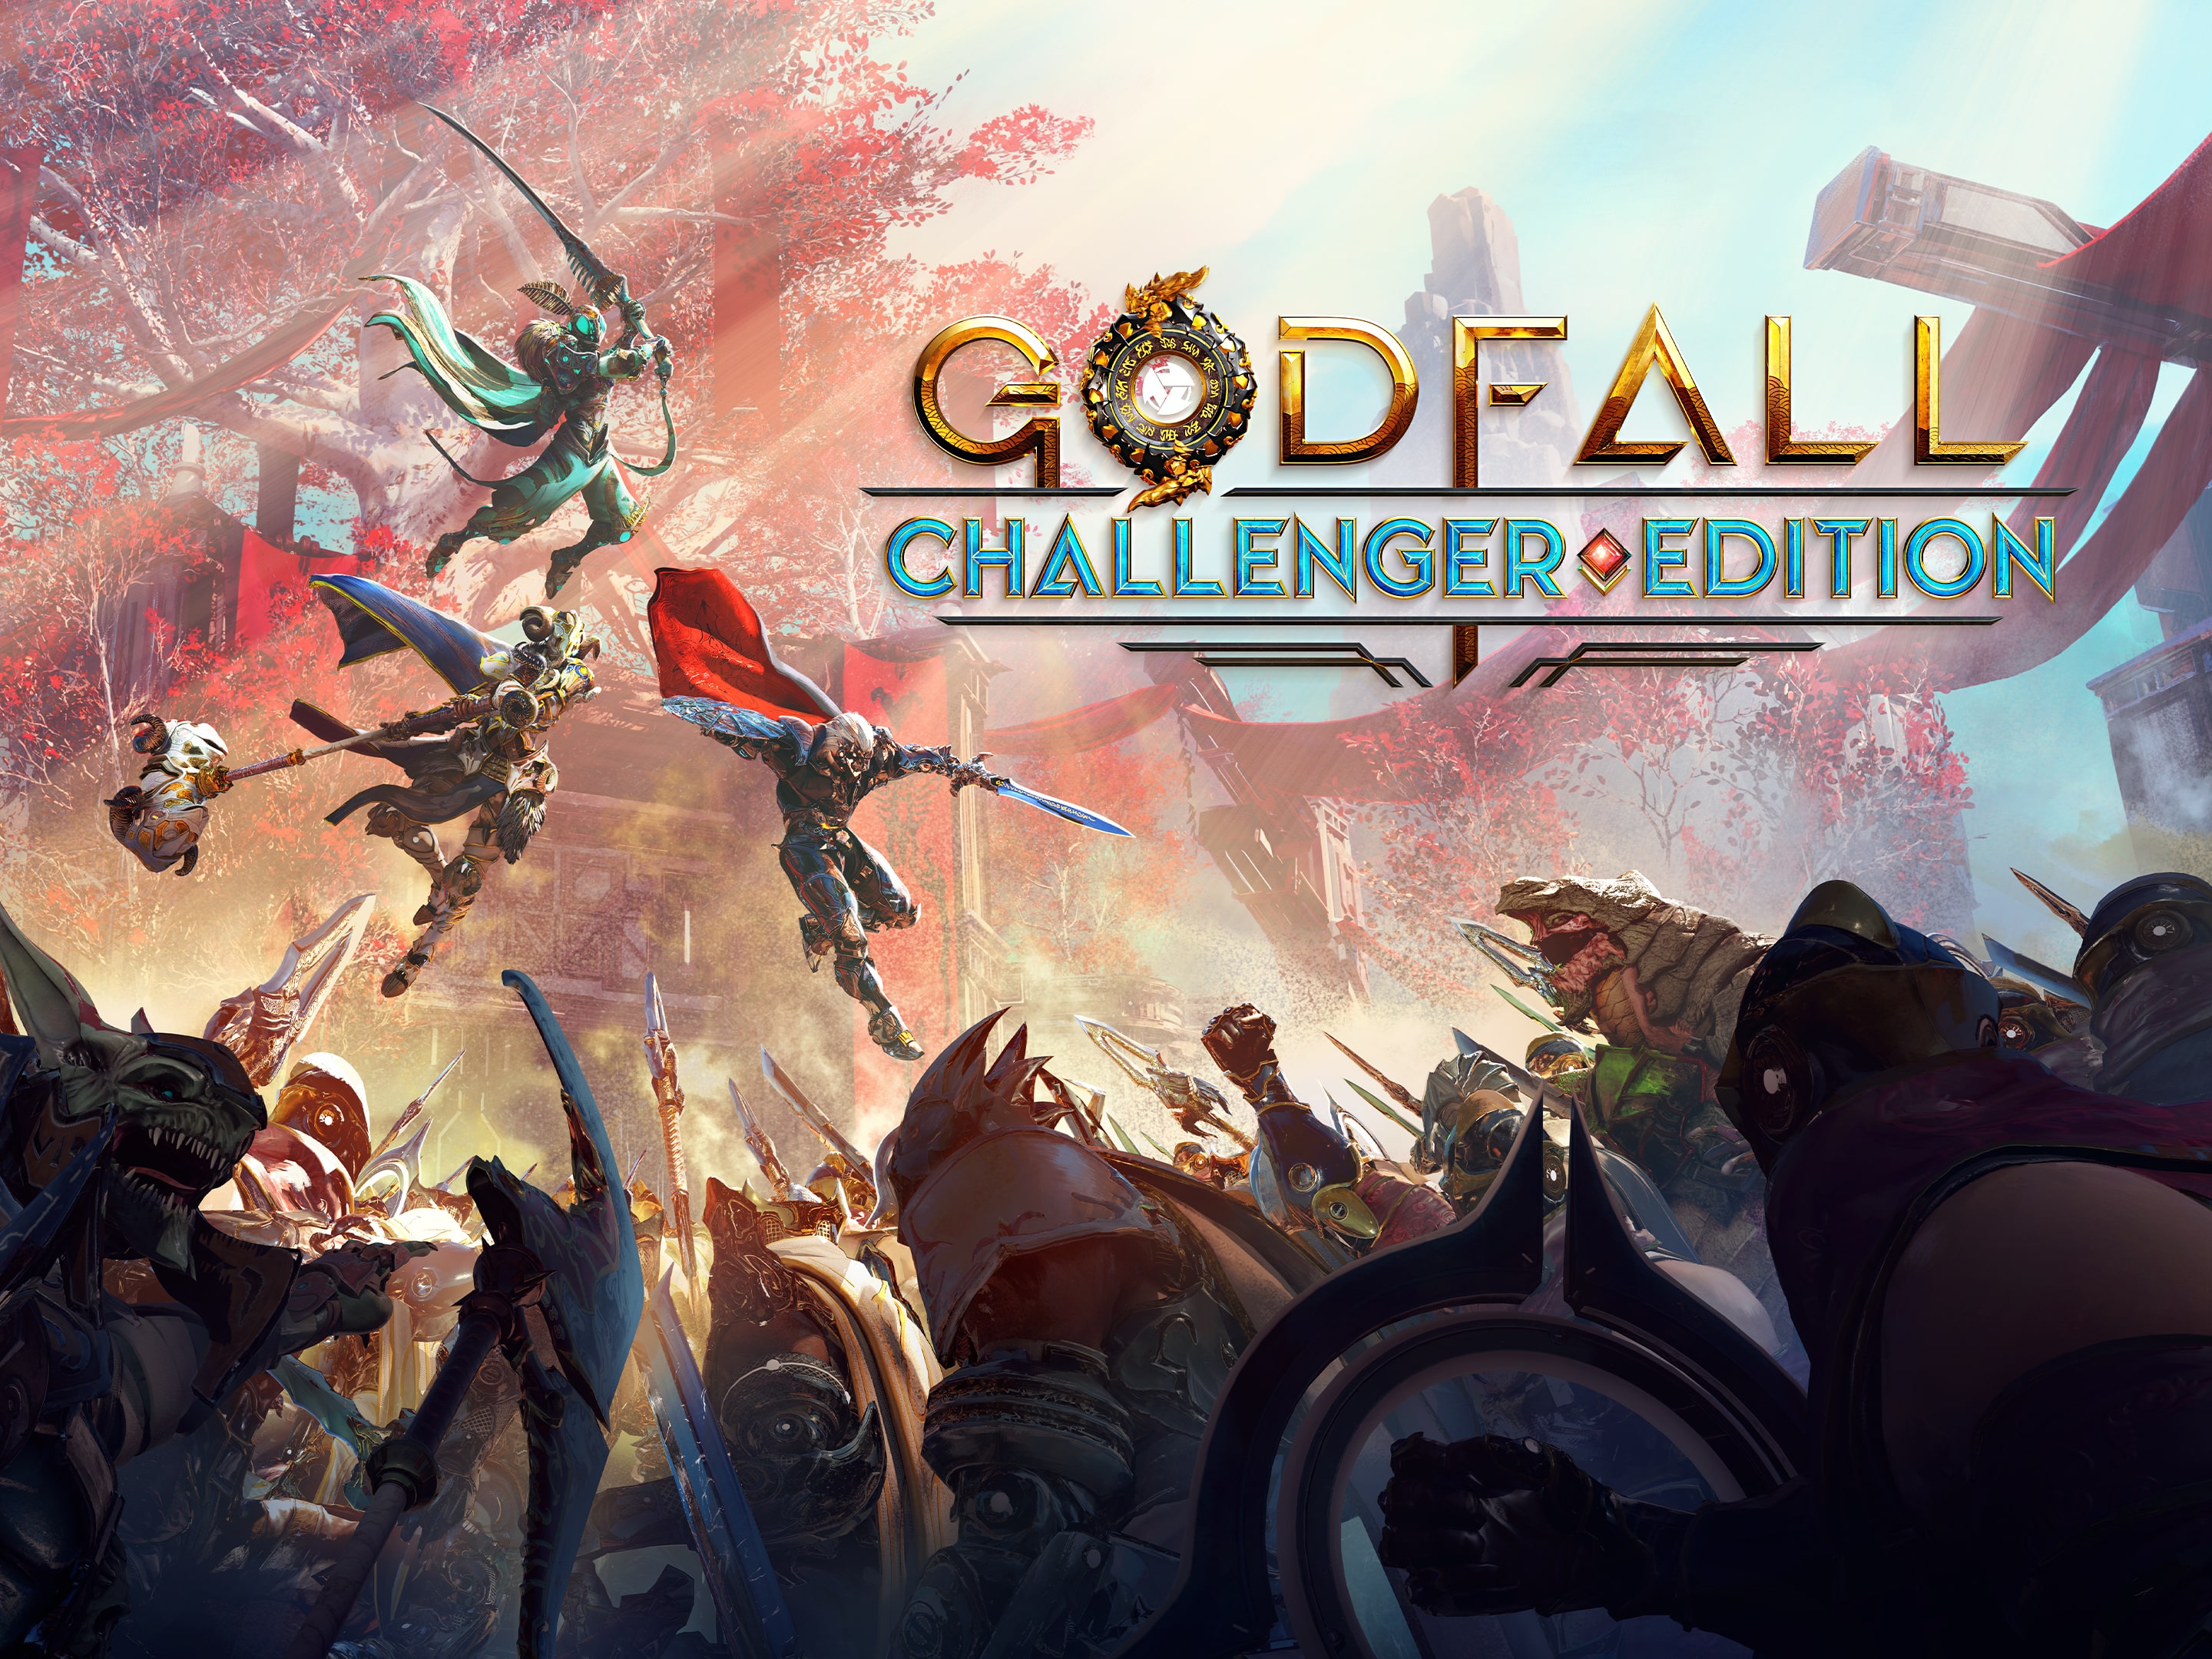 Godfall Challenger Edition PS5 & PS4